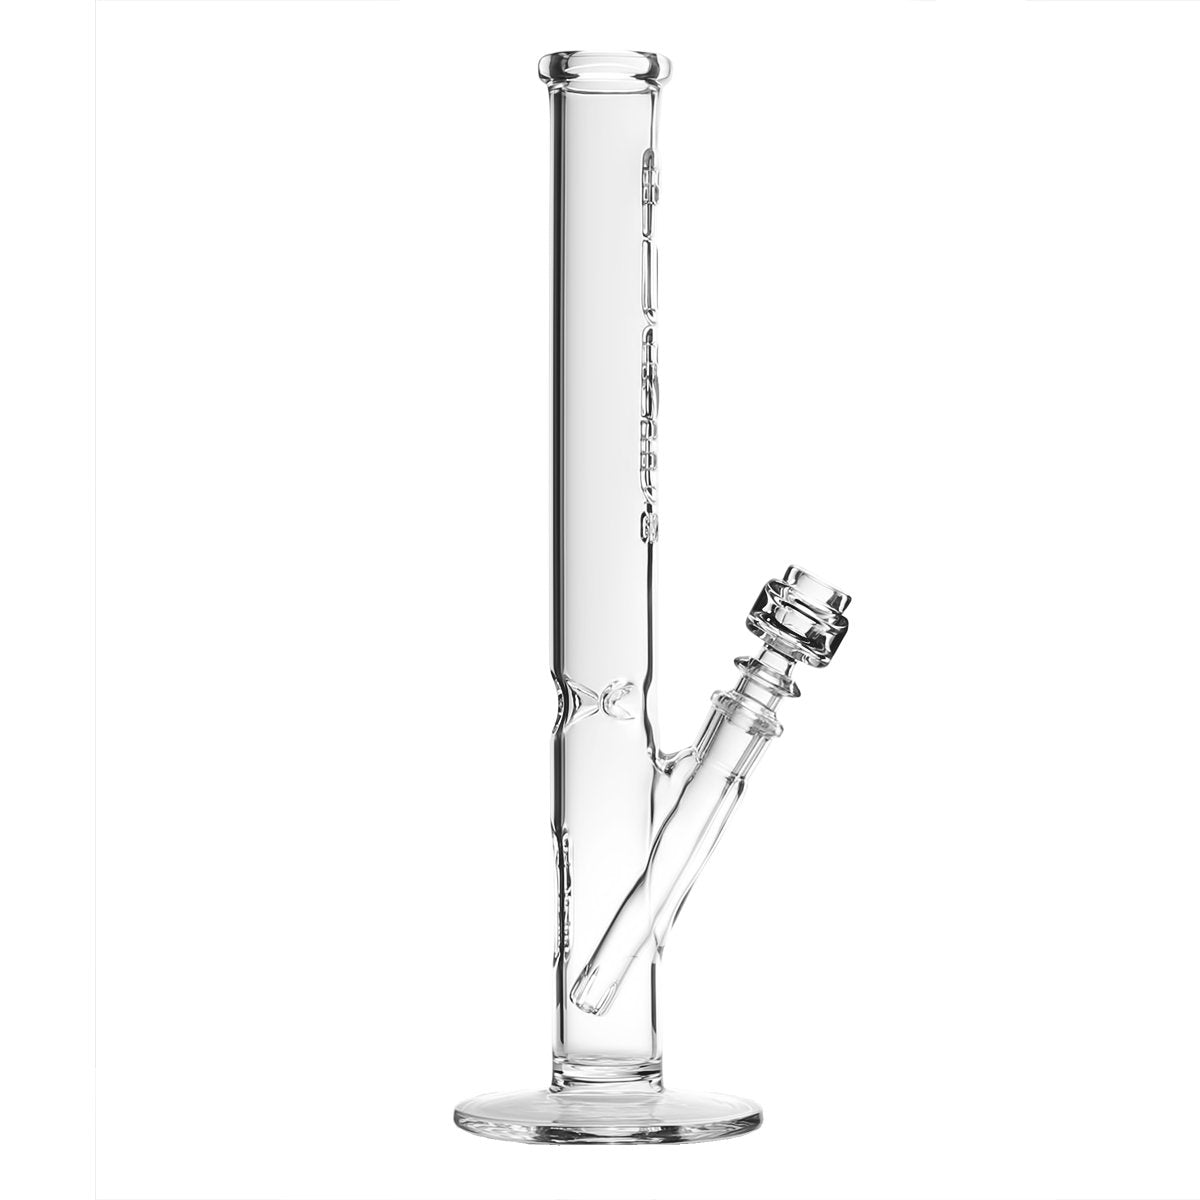 weed water pipe